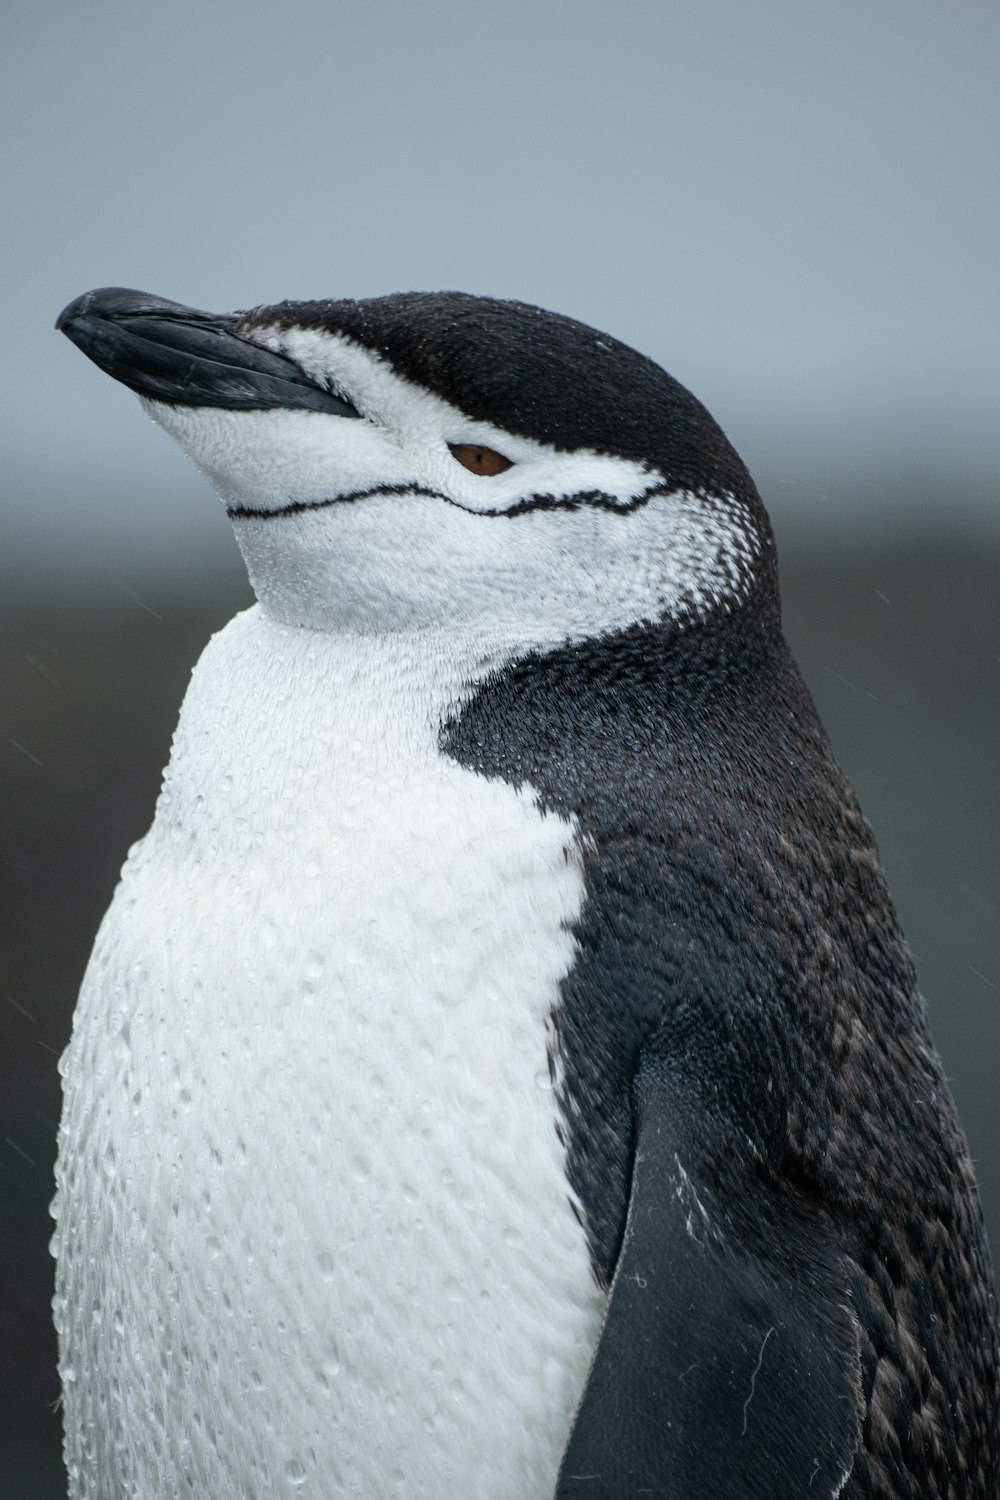 a close up of a penguin with a blurry background